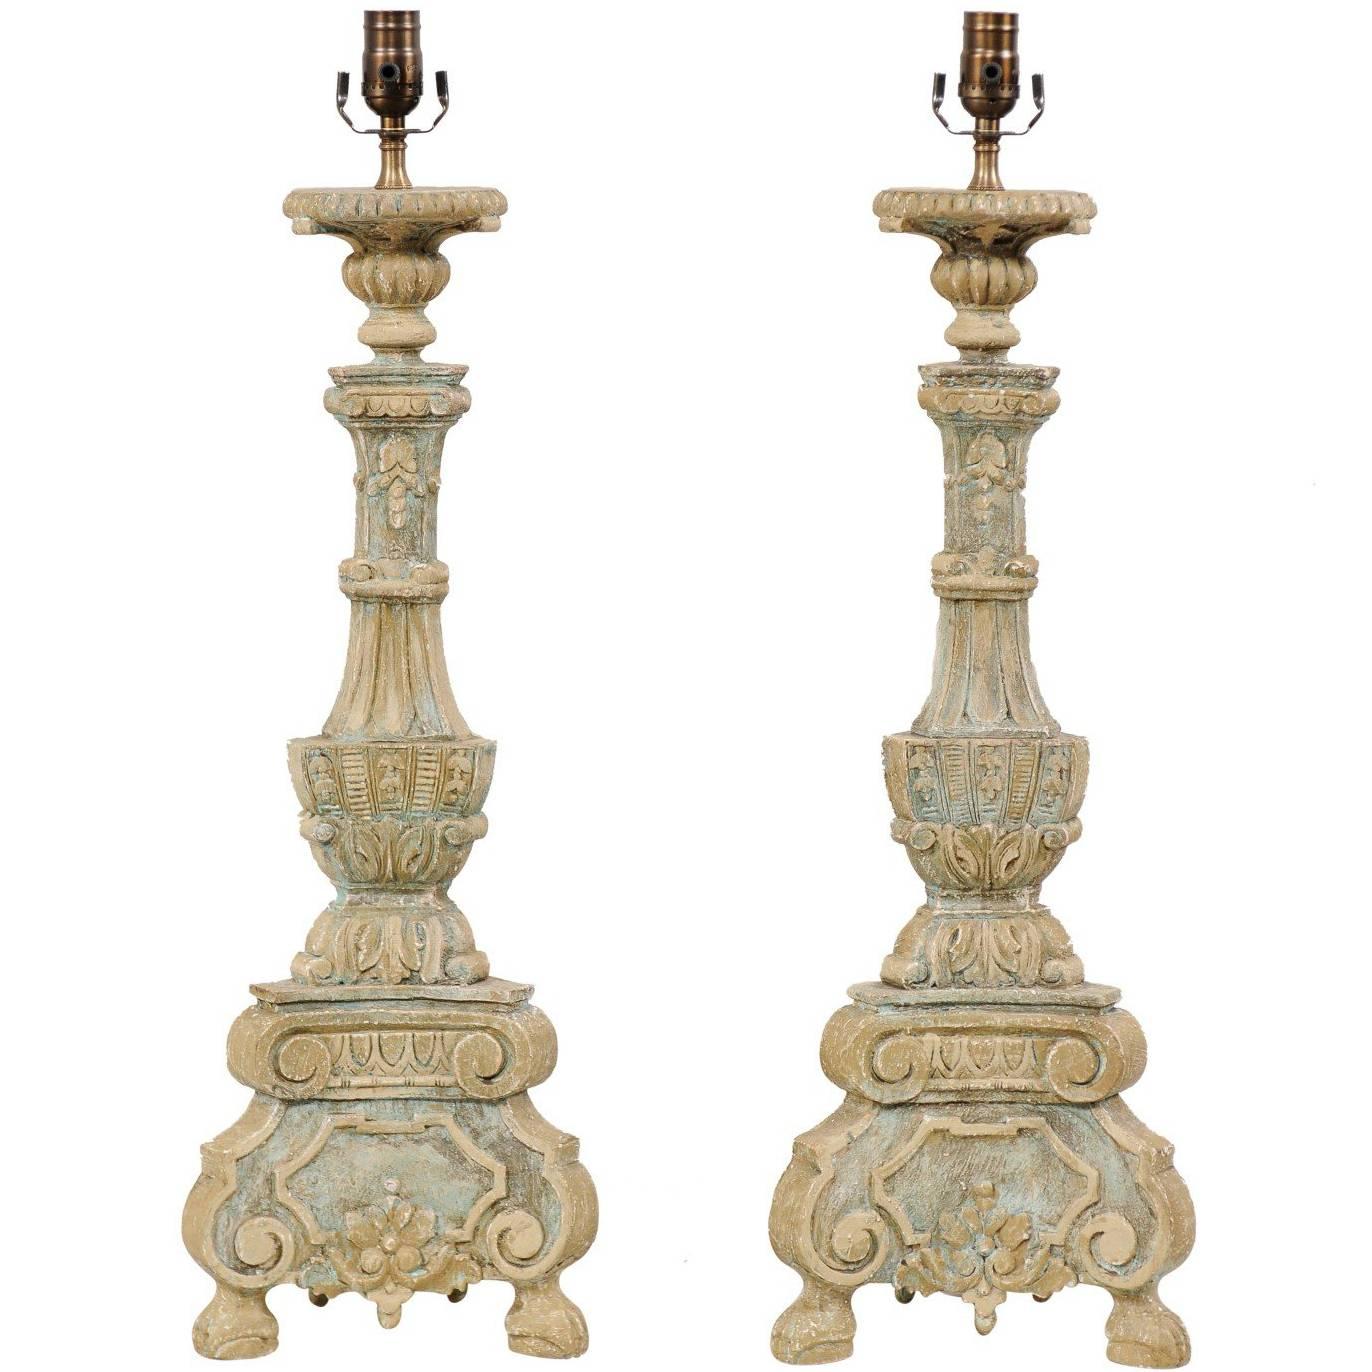 Pair of Italian Style Ornate Hand-Carved and Painted Tall Table Lamps